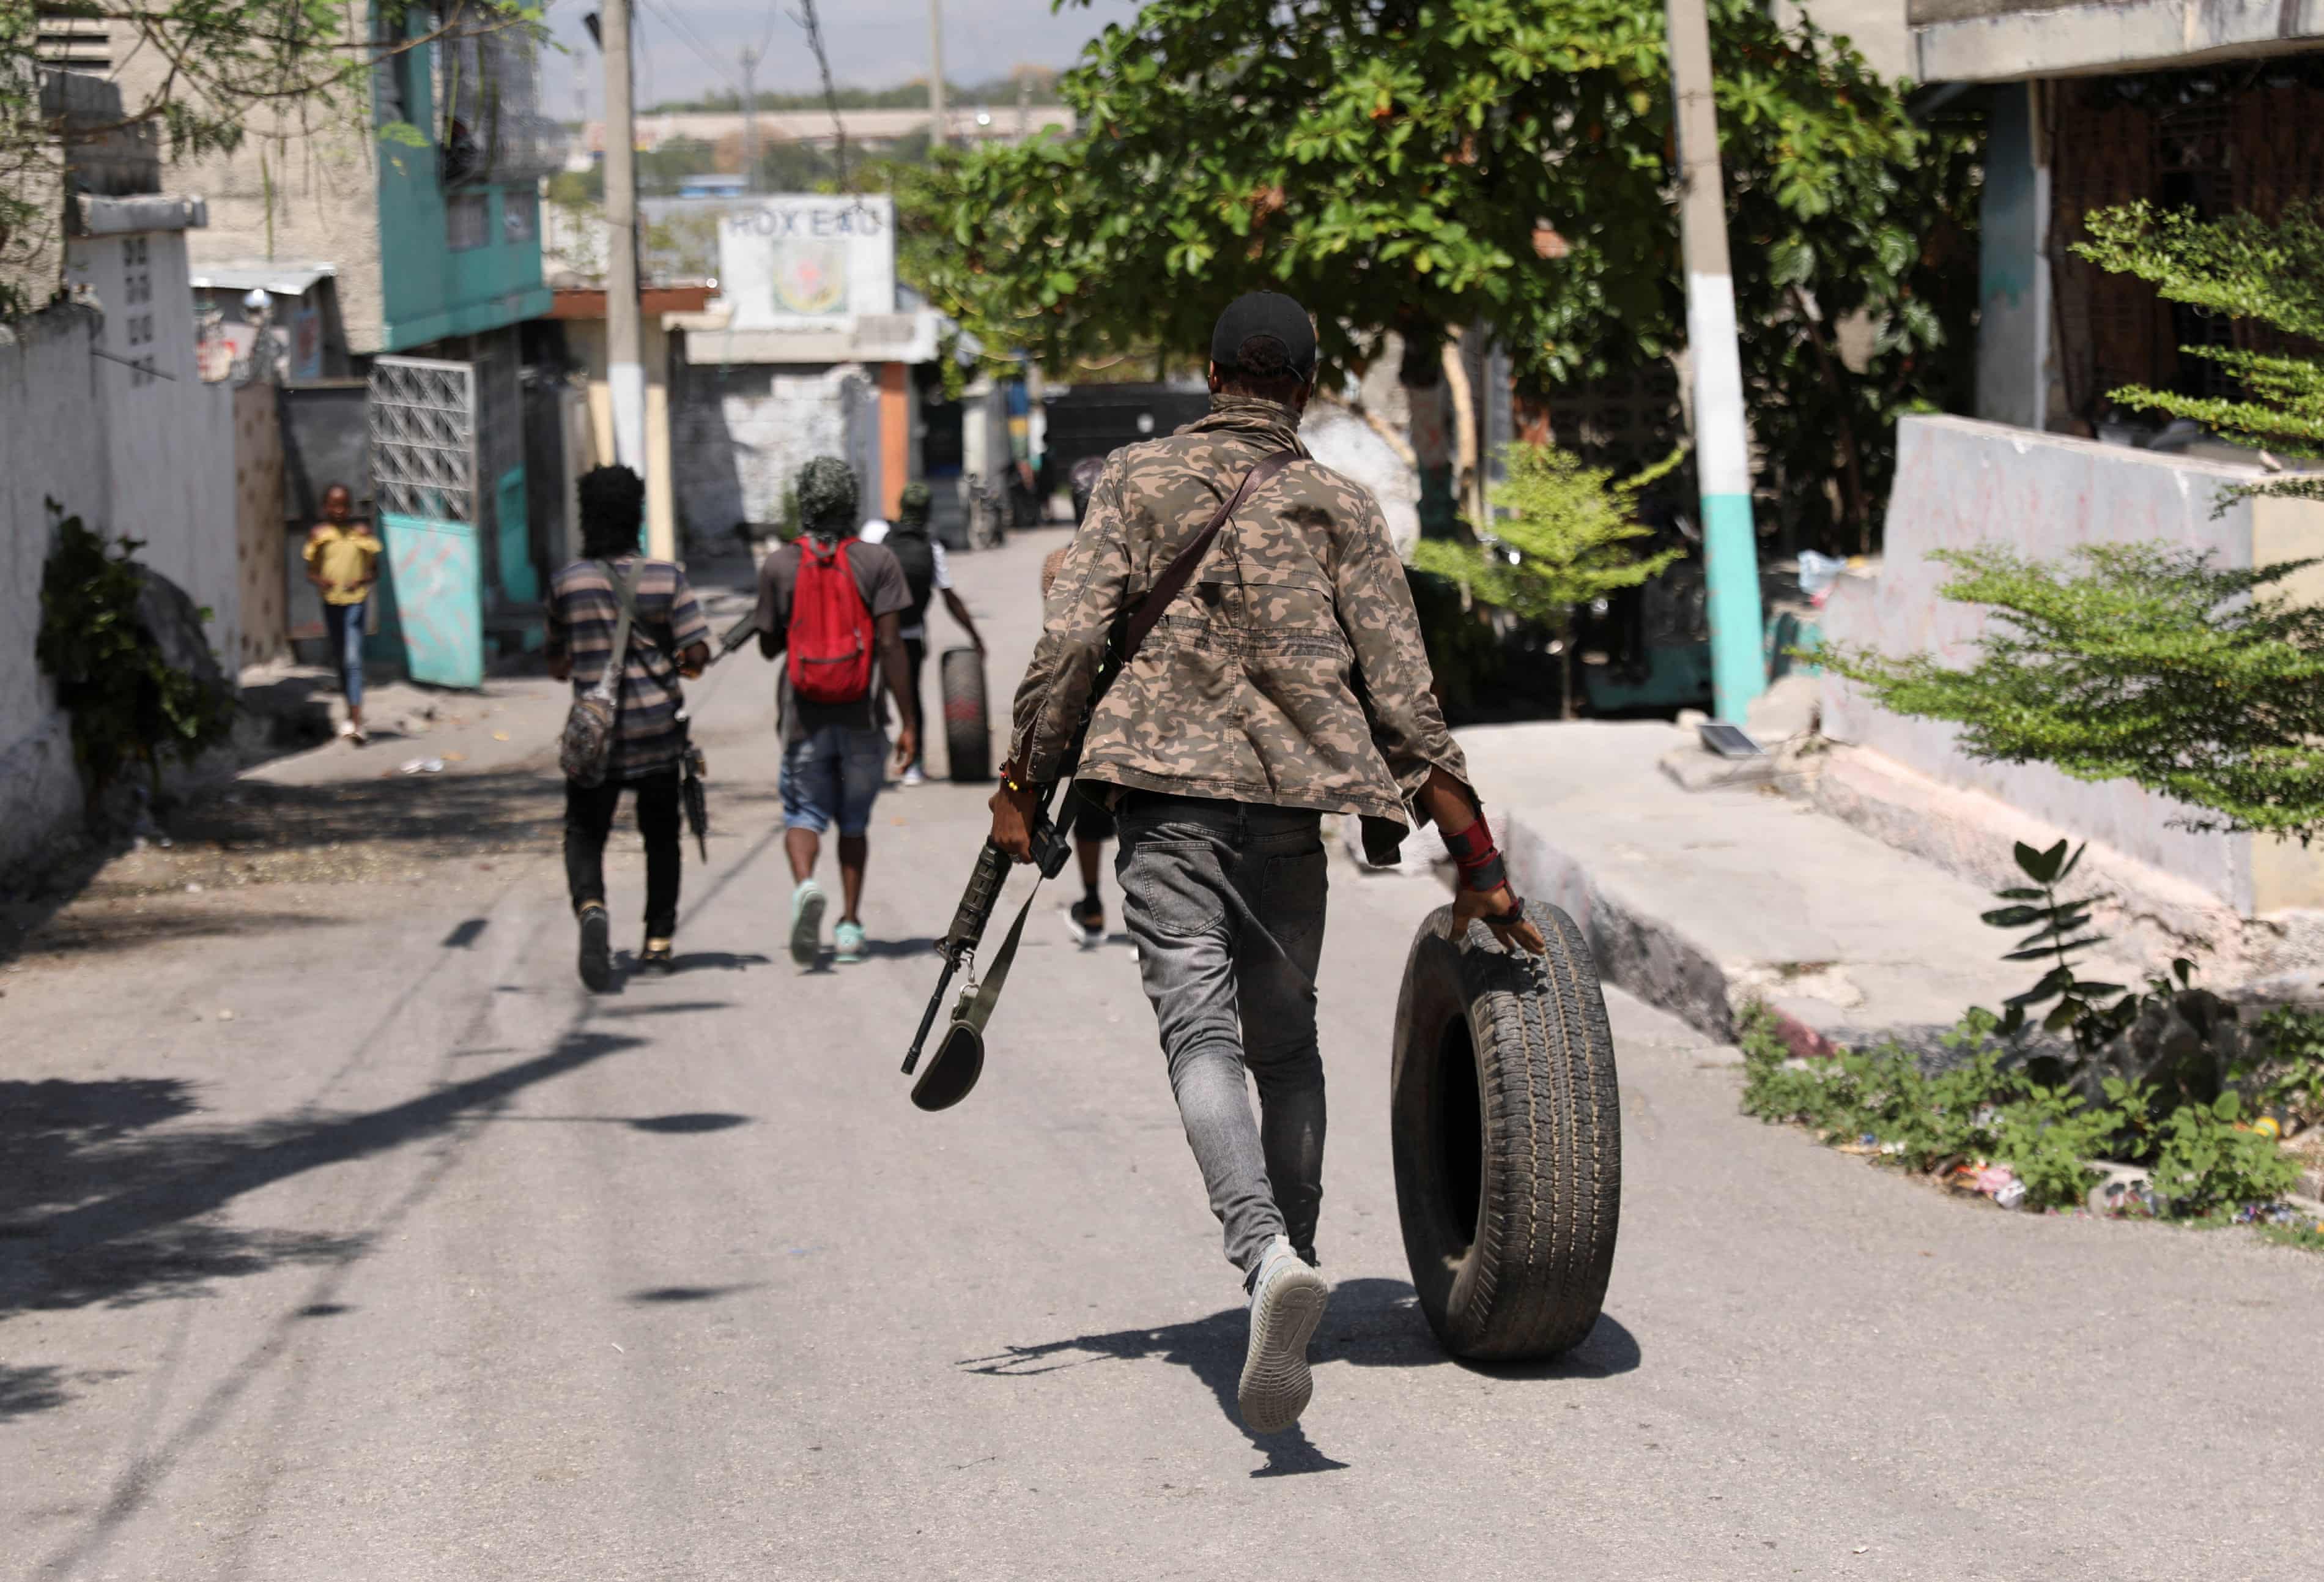 Haiti healthcare system on verge of collapse as gang warfare rages on (theguardian.com)